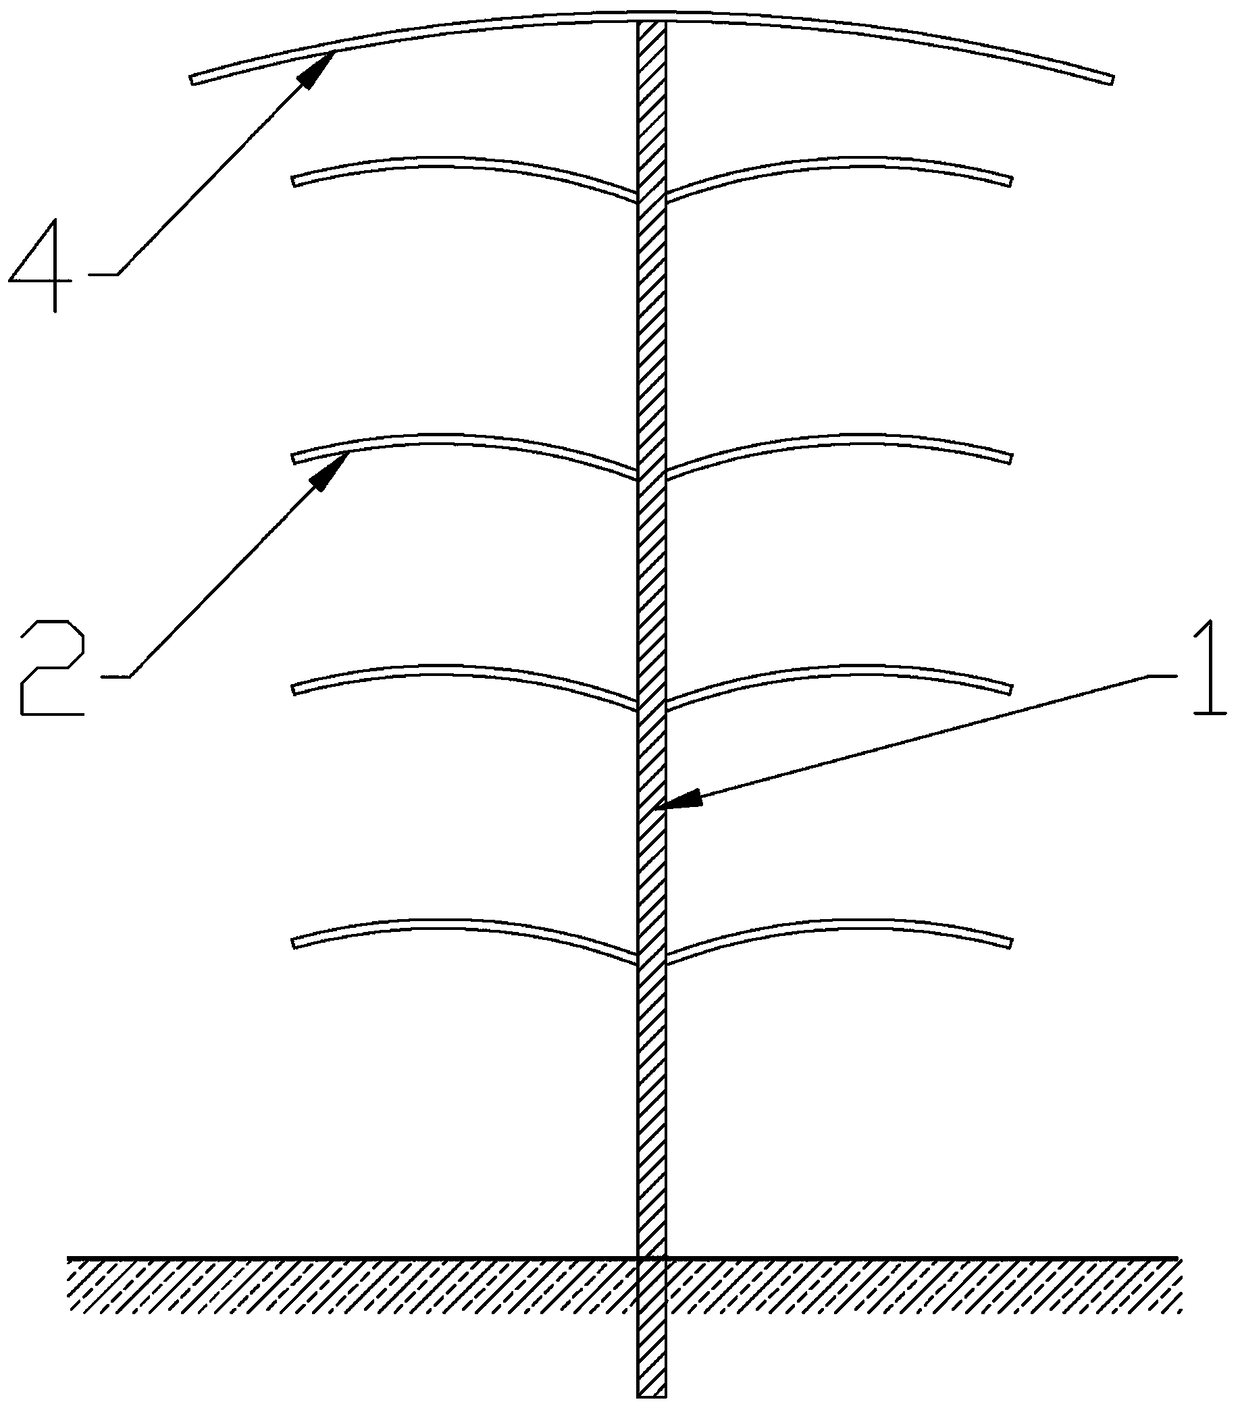 Staggered-layer cultivation method for prunus avium and four-layer arc-shaped shed frame used in method